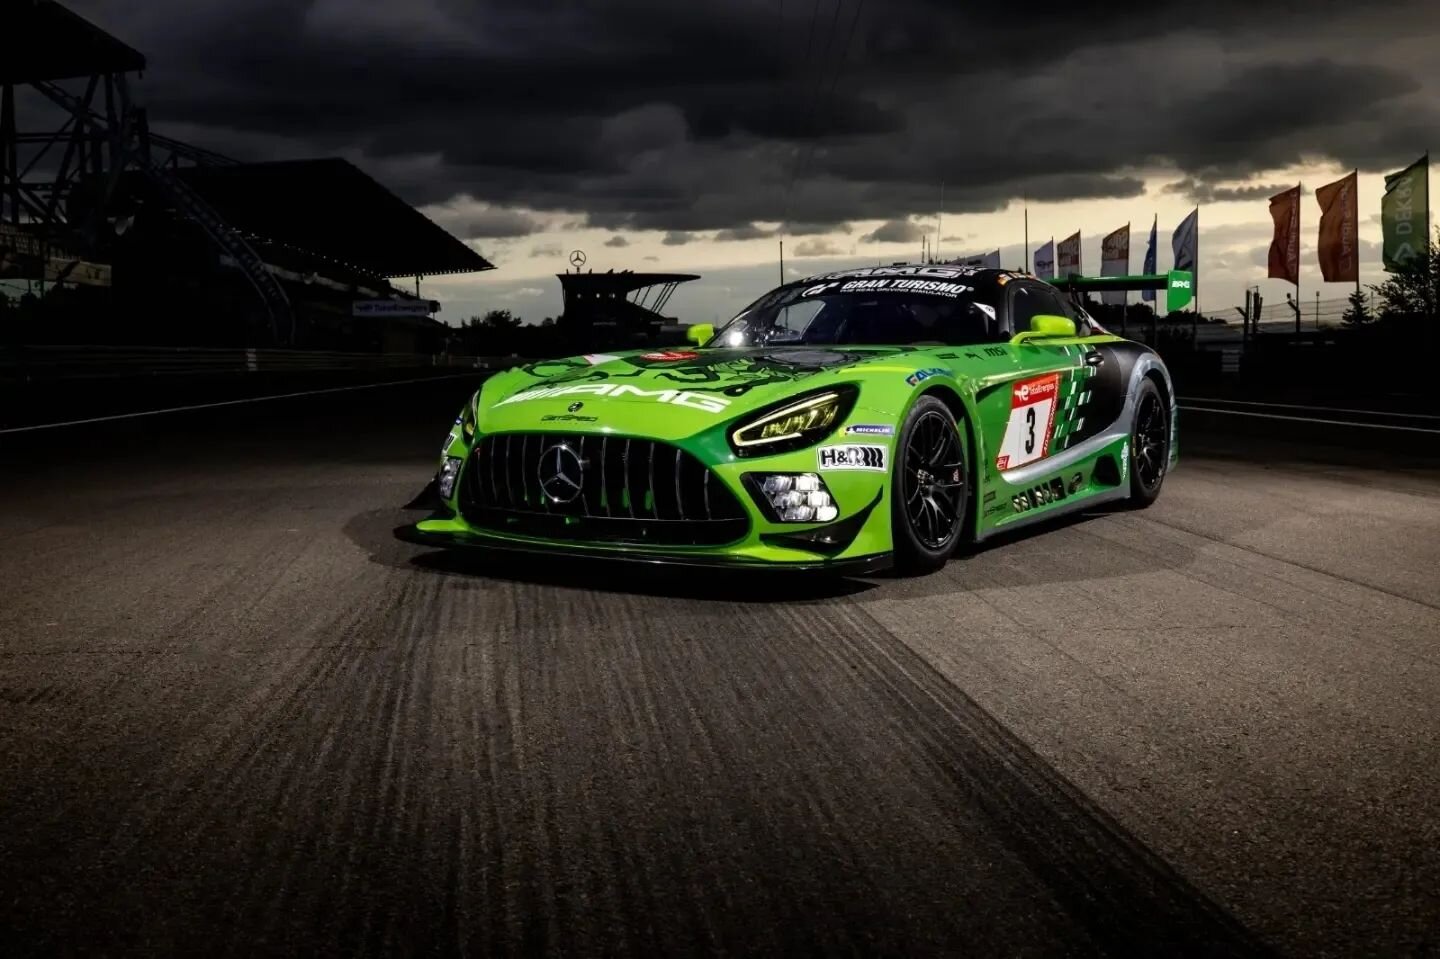 Let me introduce you to the Beast of the Green Hell 😈 Does this look like a winner to you as well?! 😜

#WeLivePerformance #MercedesAMGMotorsport #MercedesAMG #AMG #AMGGT3 #WorldsFastestFamily #24hNBR #24hAMG #beastofthegreenhell